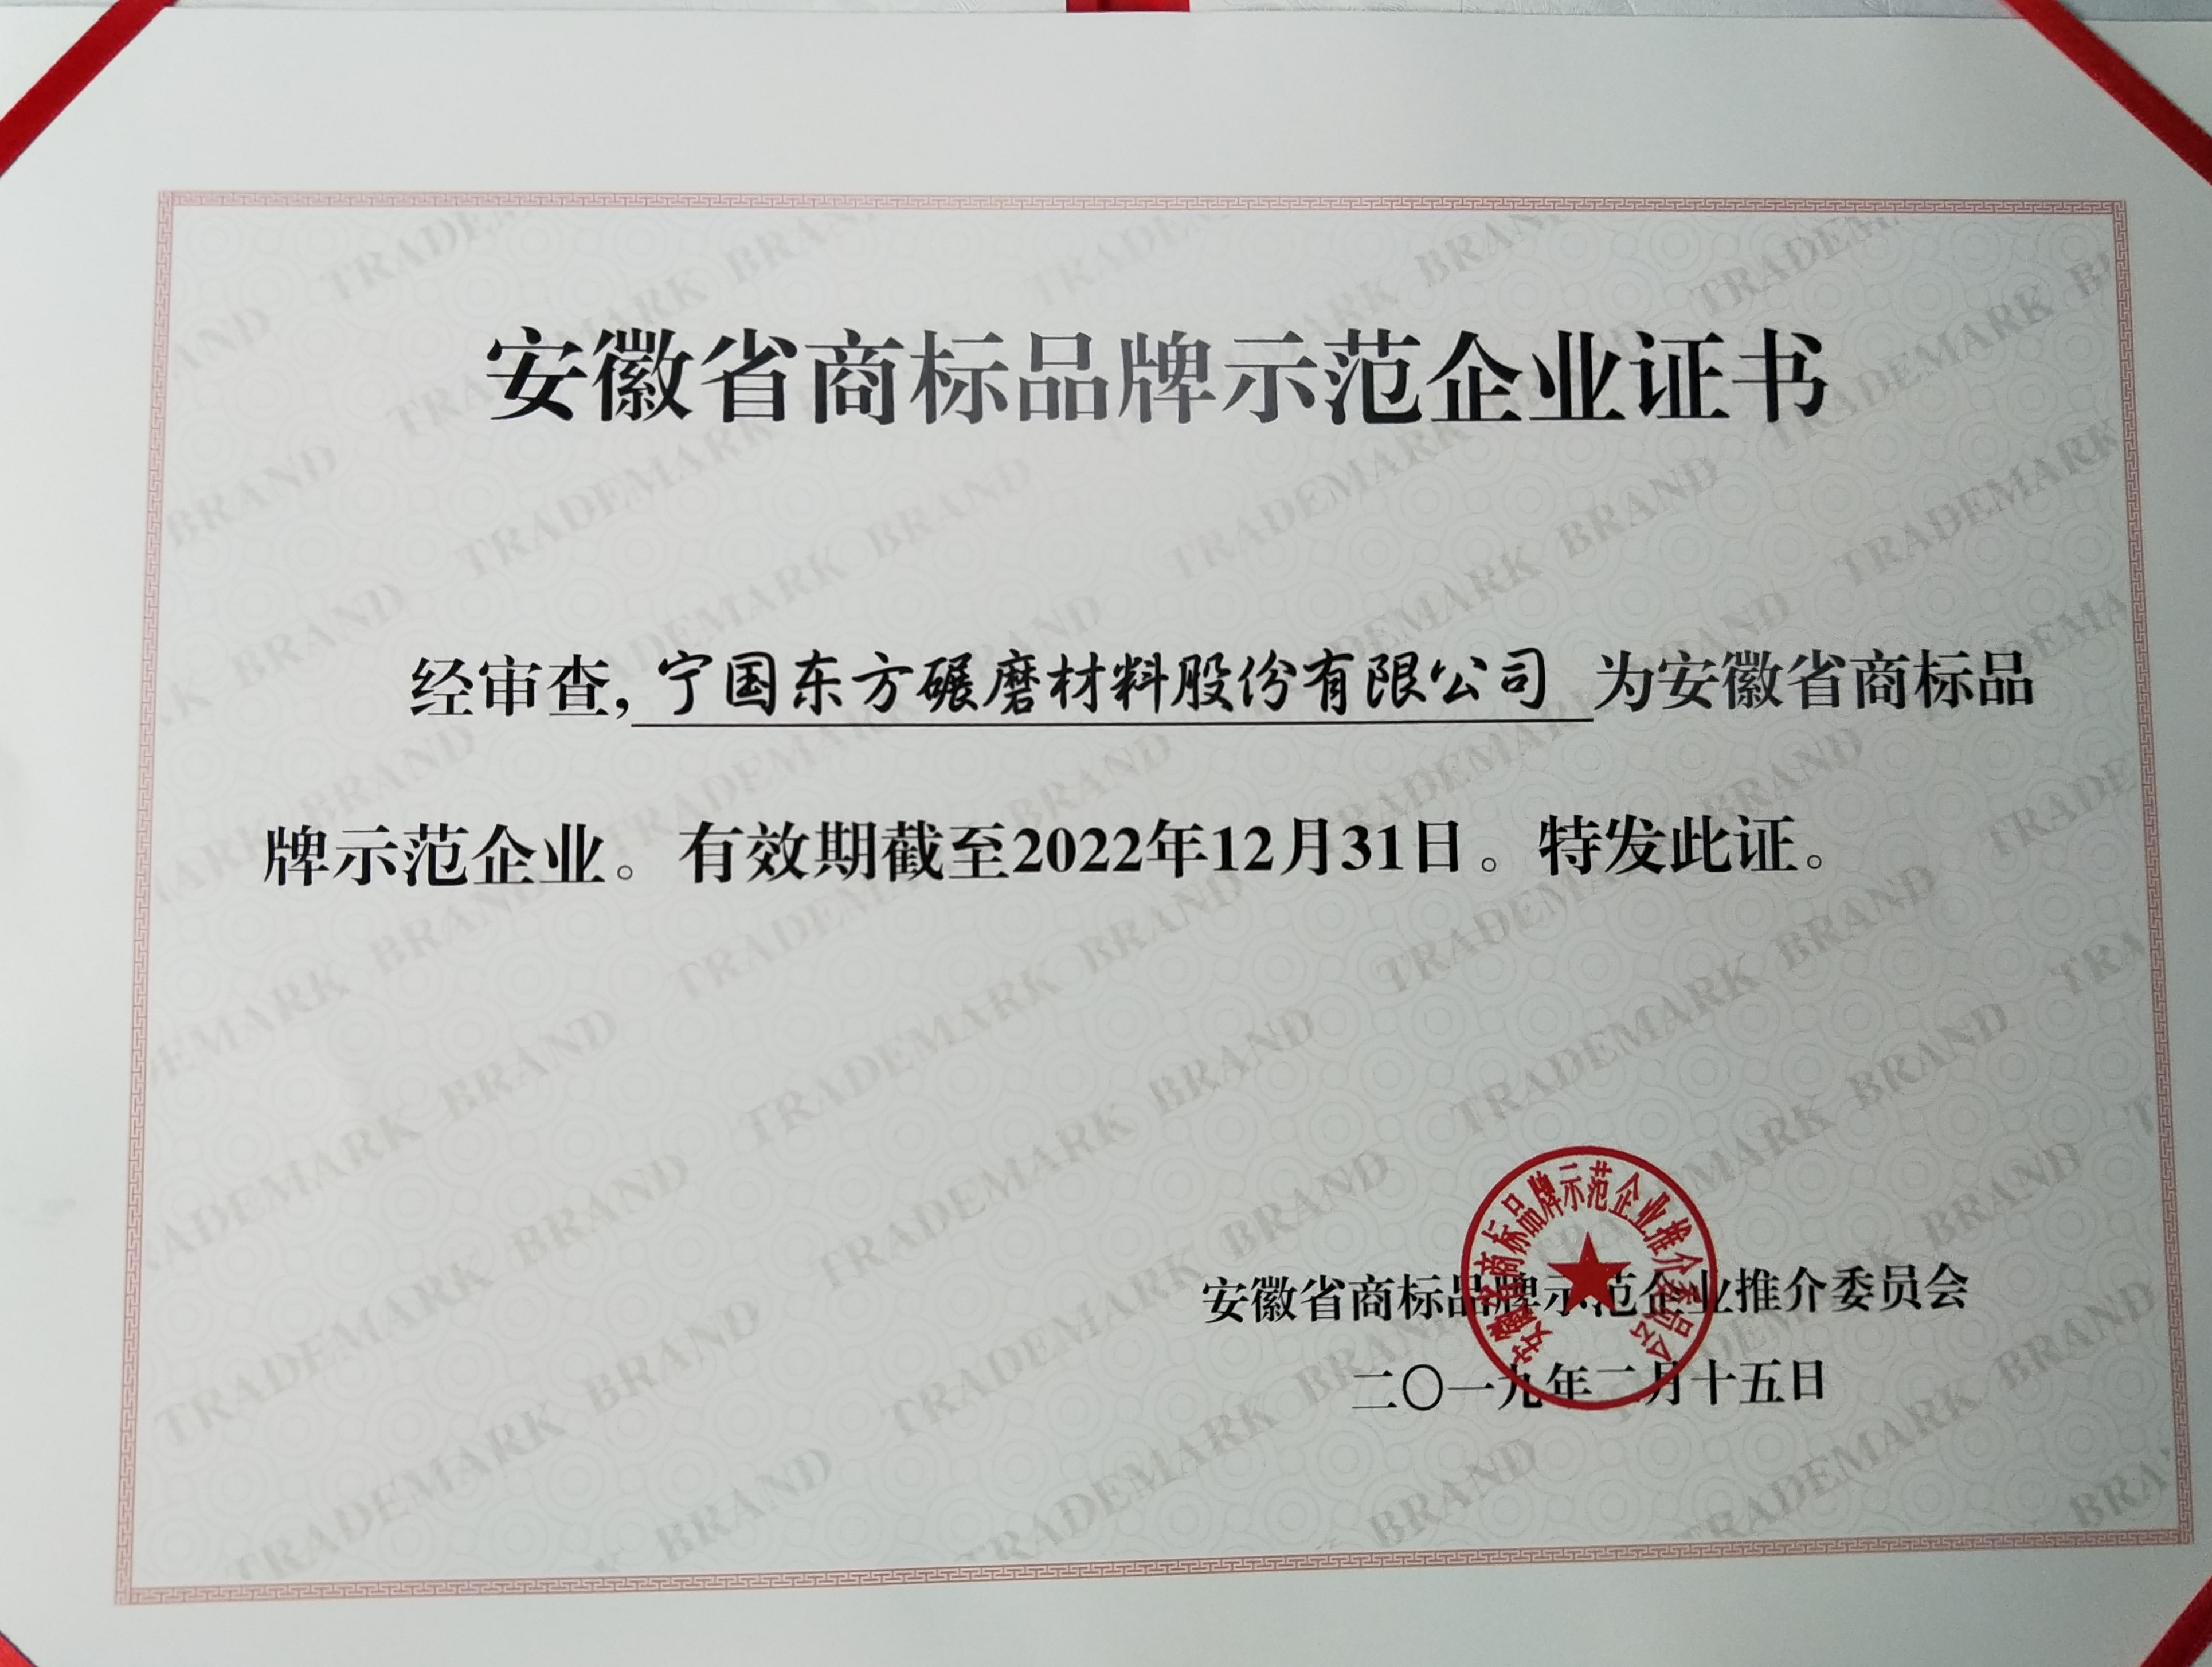 The company was awarded "Anhui trademark brand demonstration enterprise"